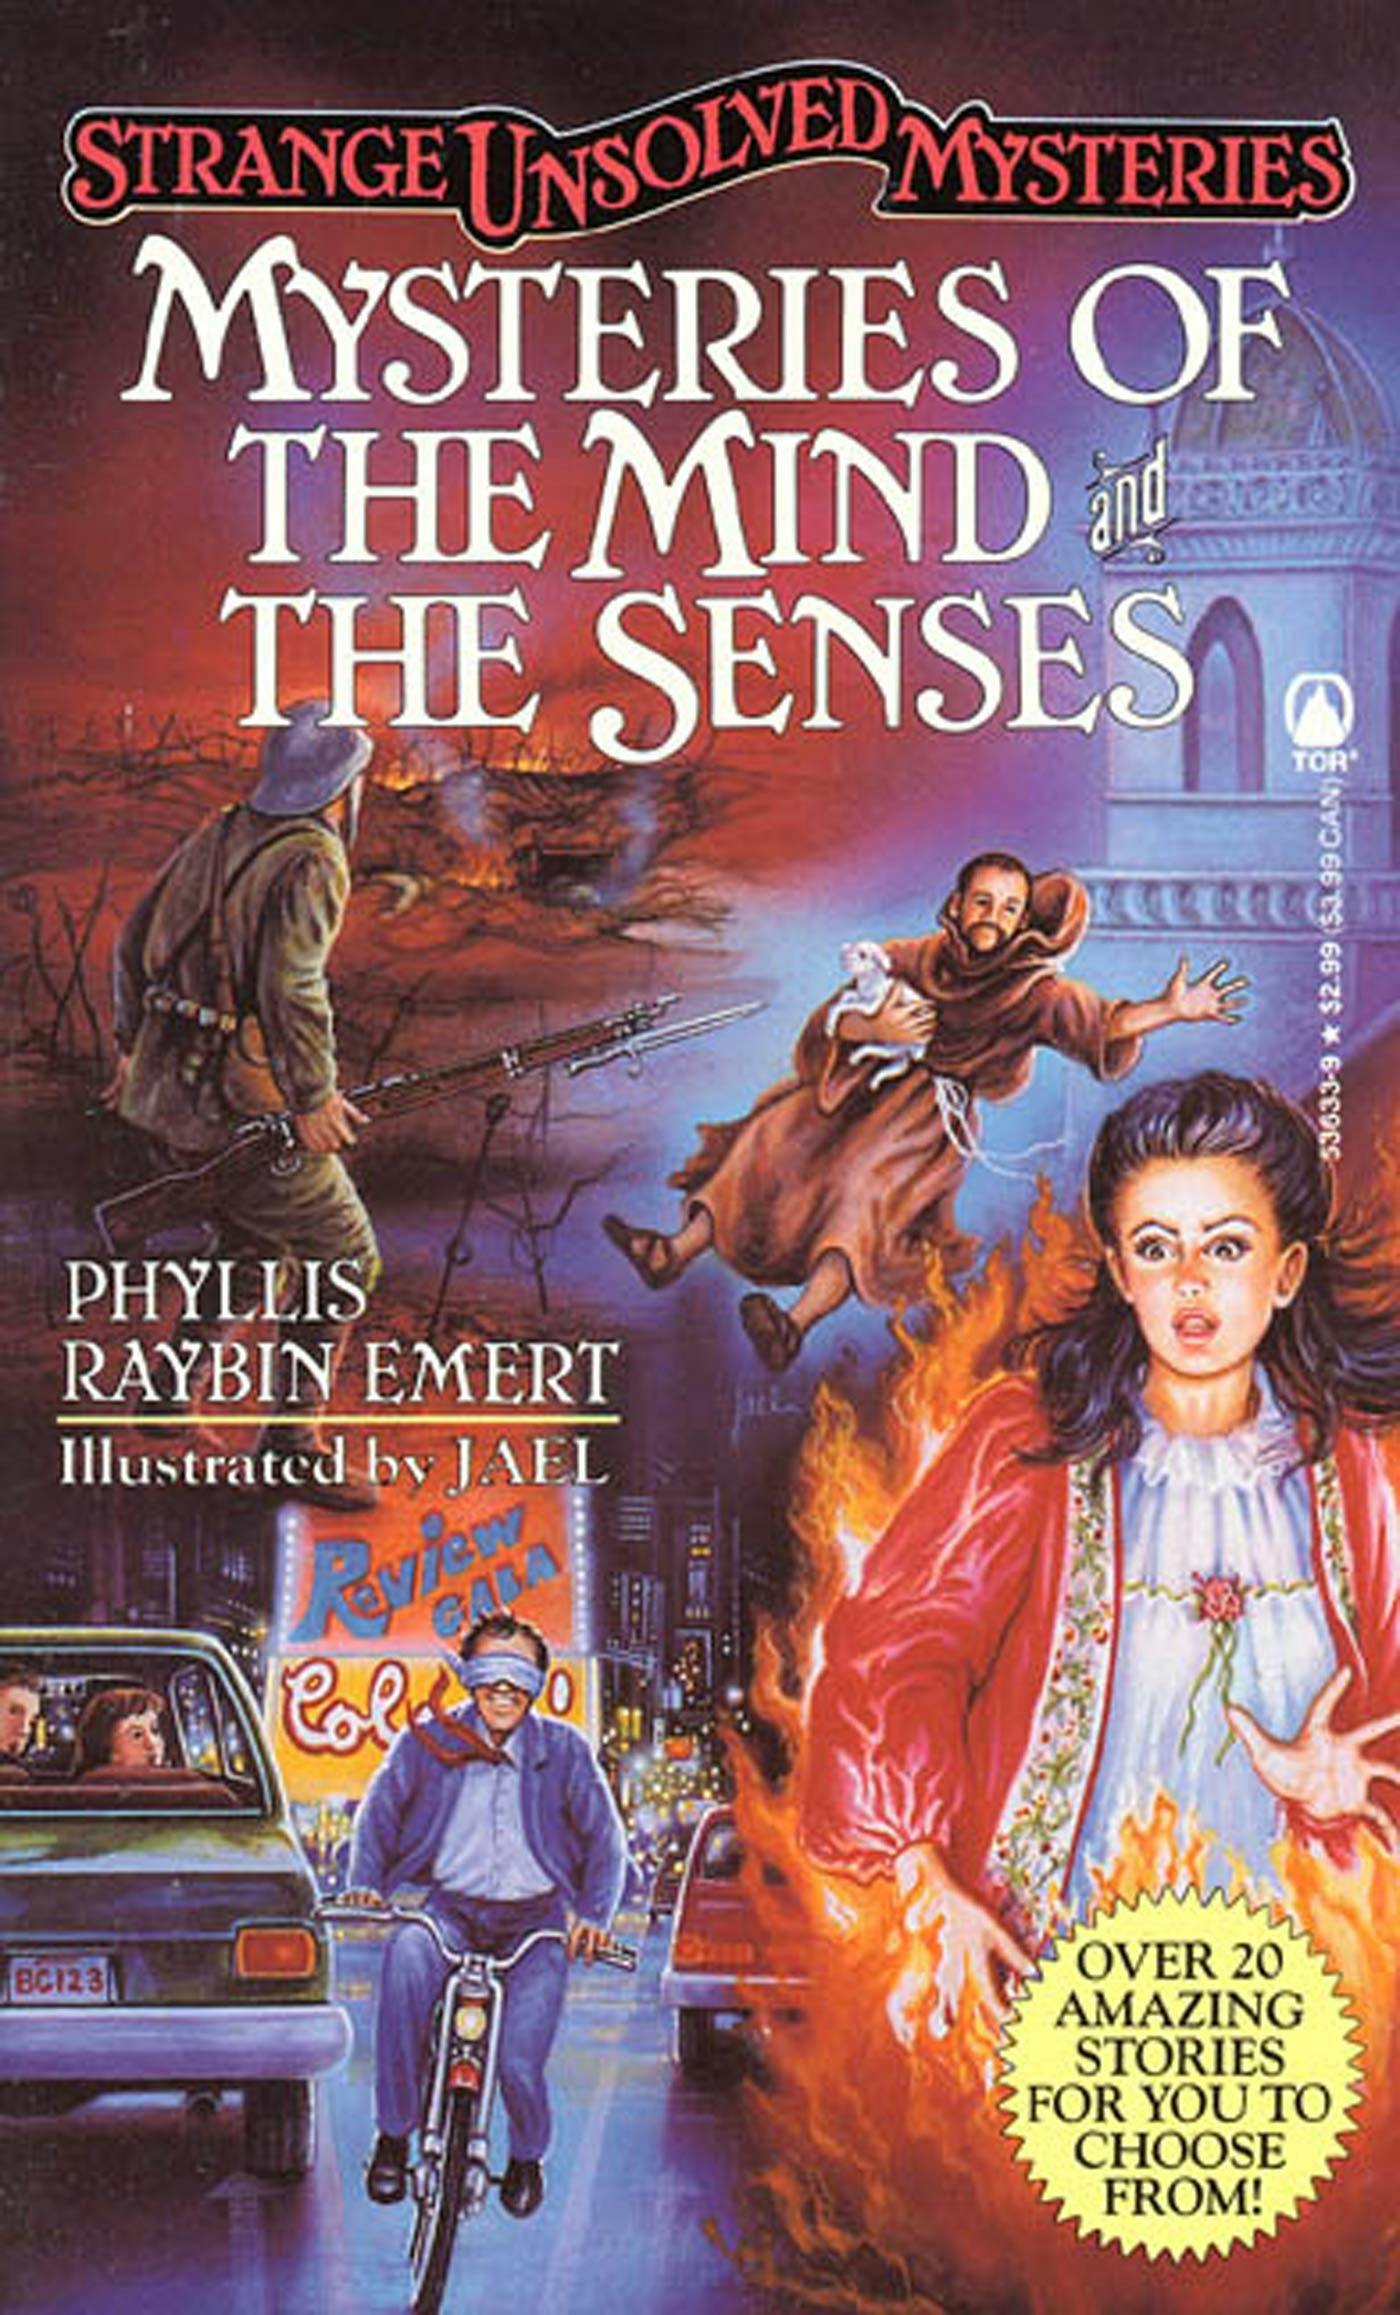 Cover for the book titled as: Mysteries of the Mind and Senses